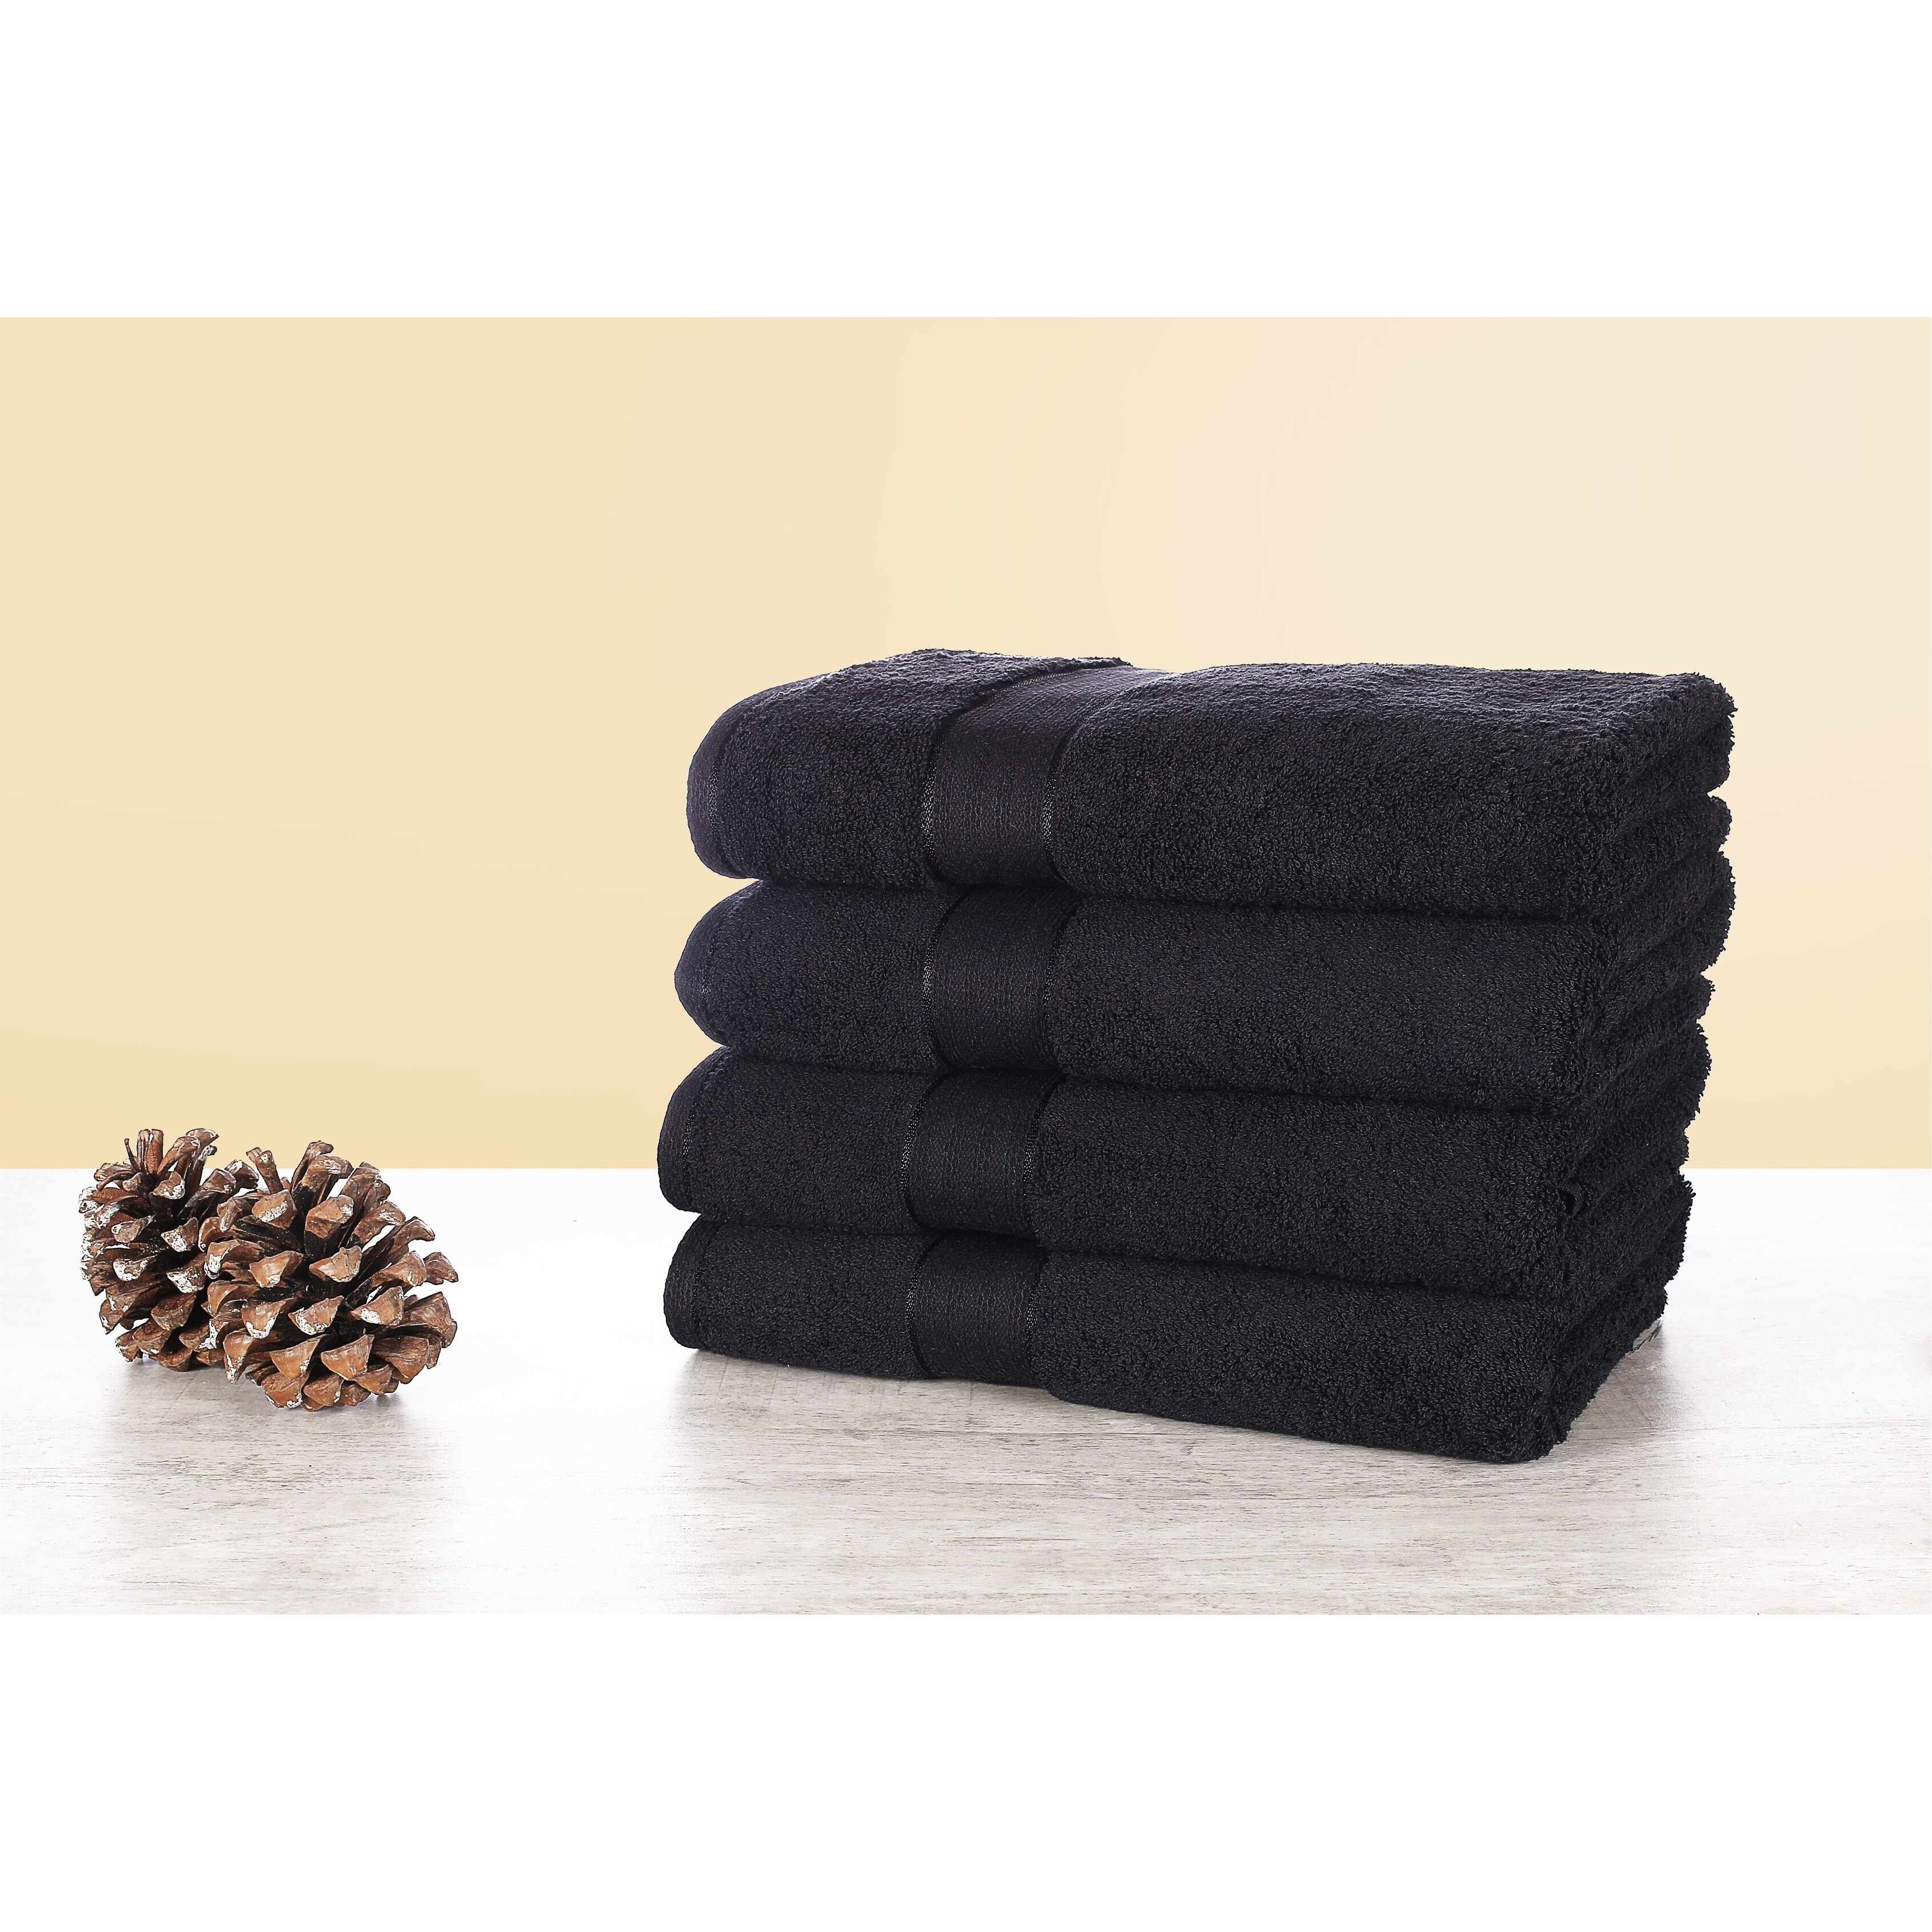 https://ak1.ostkcdn.com/images/products/30405125/Glamburg-700-GSM-4-Pack-Bath-Towel-Set-100-Combed-Cotton-4-Bath-Towels-27x54-Durable-Ultra-Soft-Highly-Absorbent-63548d8c-6149-4edc-80a2-a22587943f1e.jpg